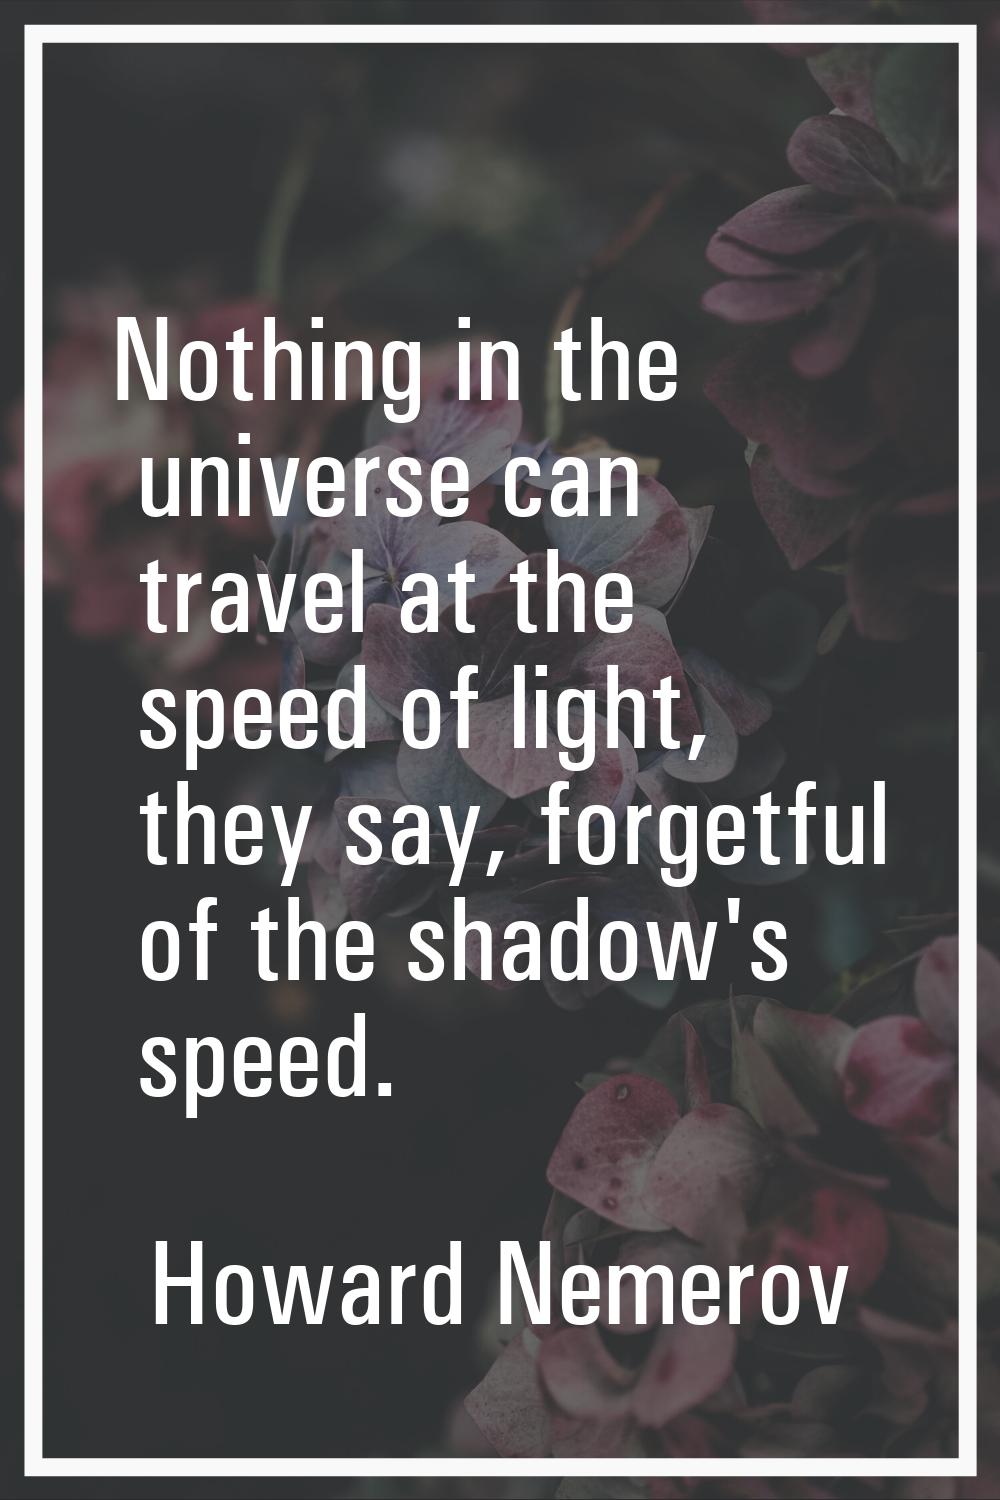 Nothing in the universe can travel at the speed of light, they say, forgetful of the shadow's speed